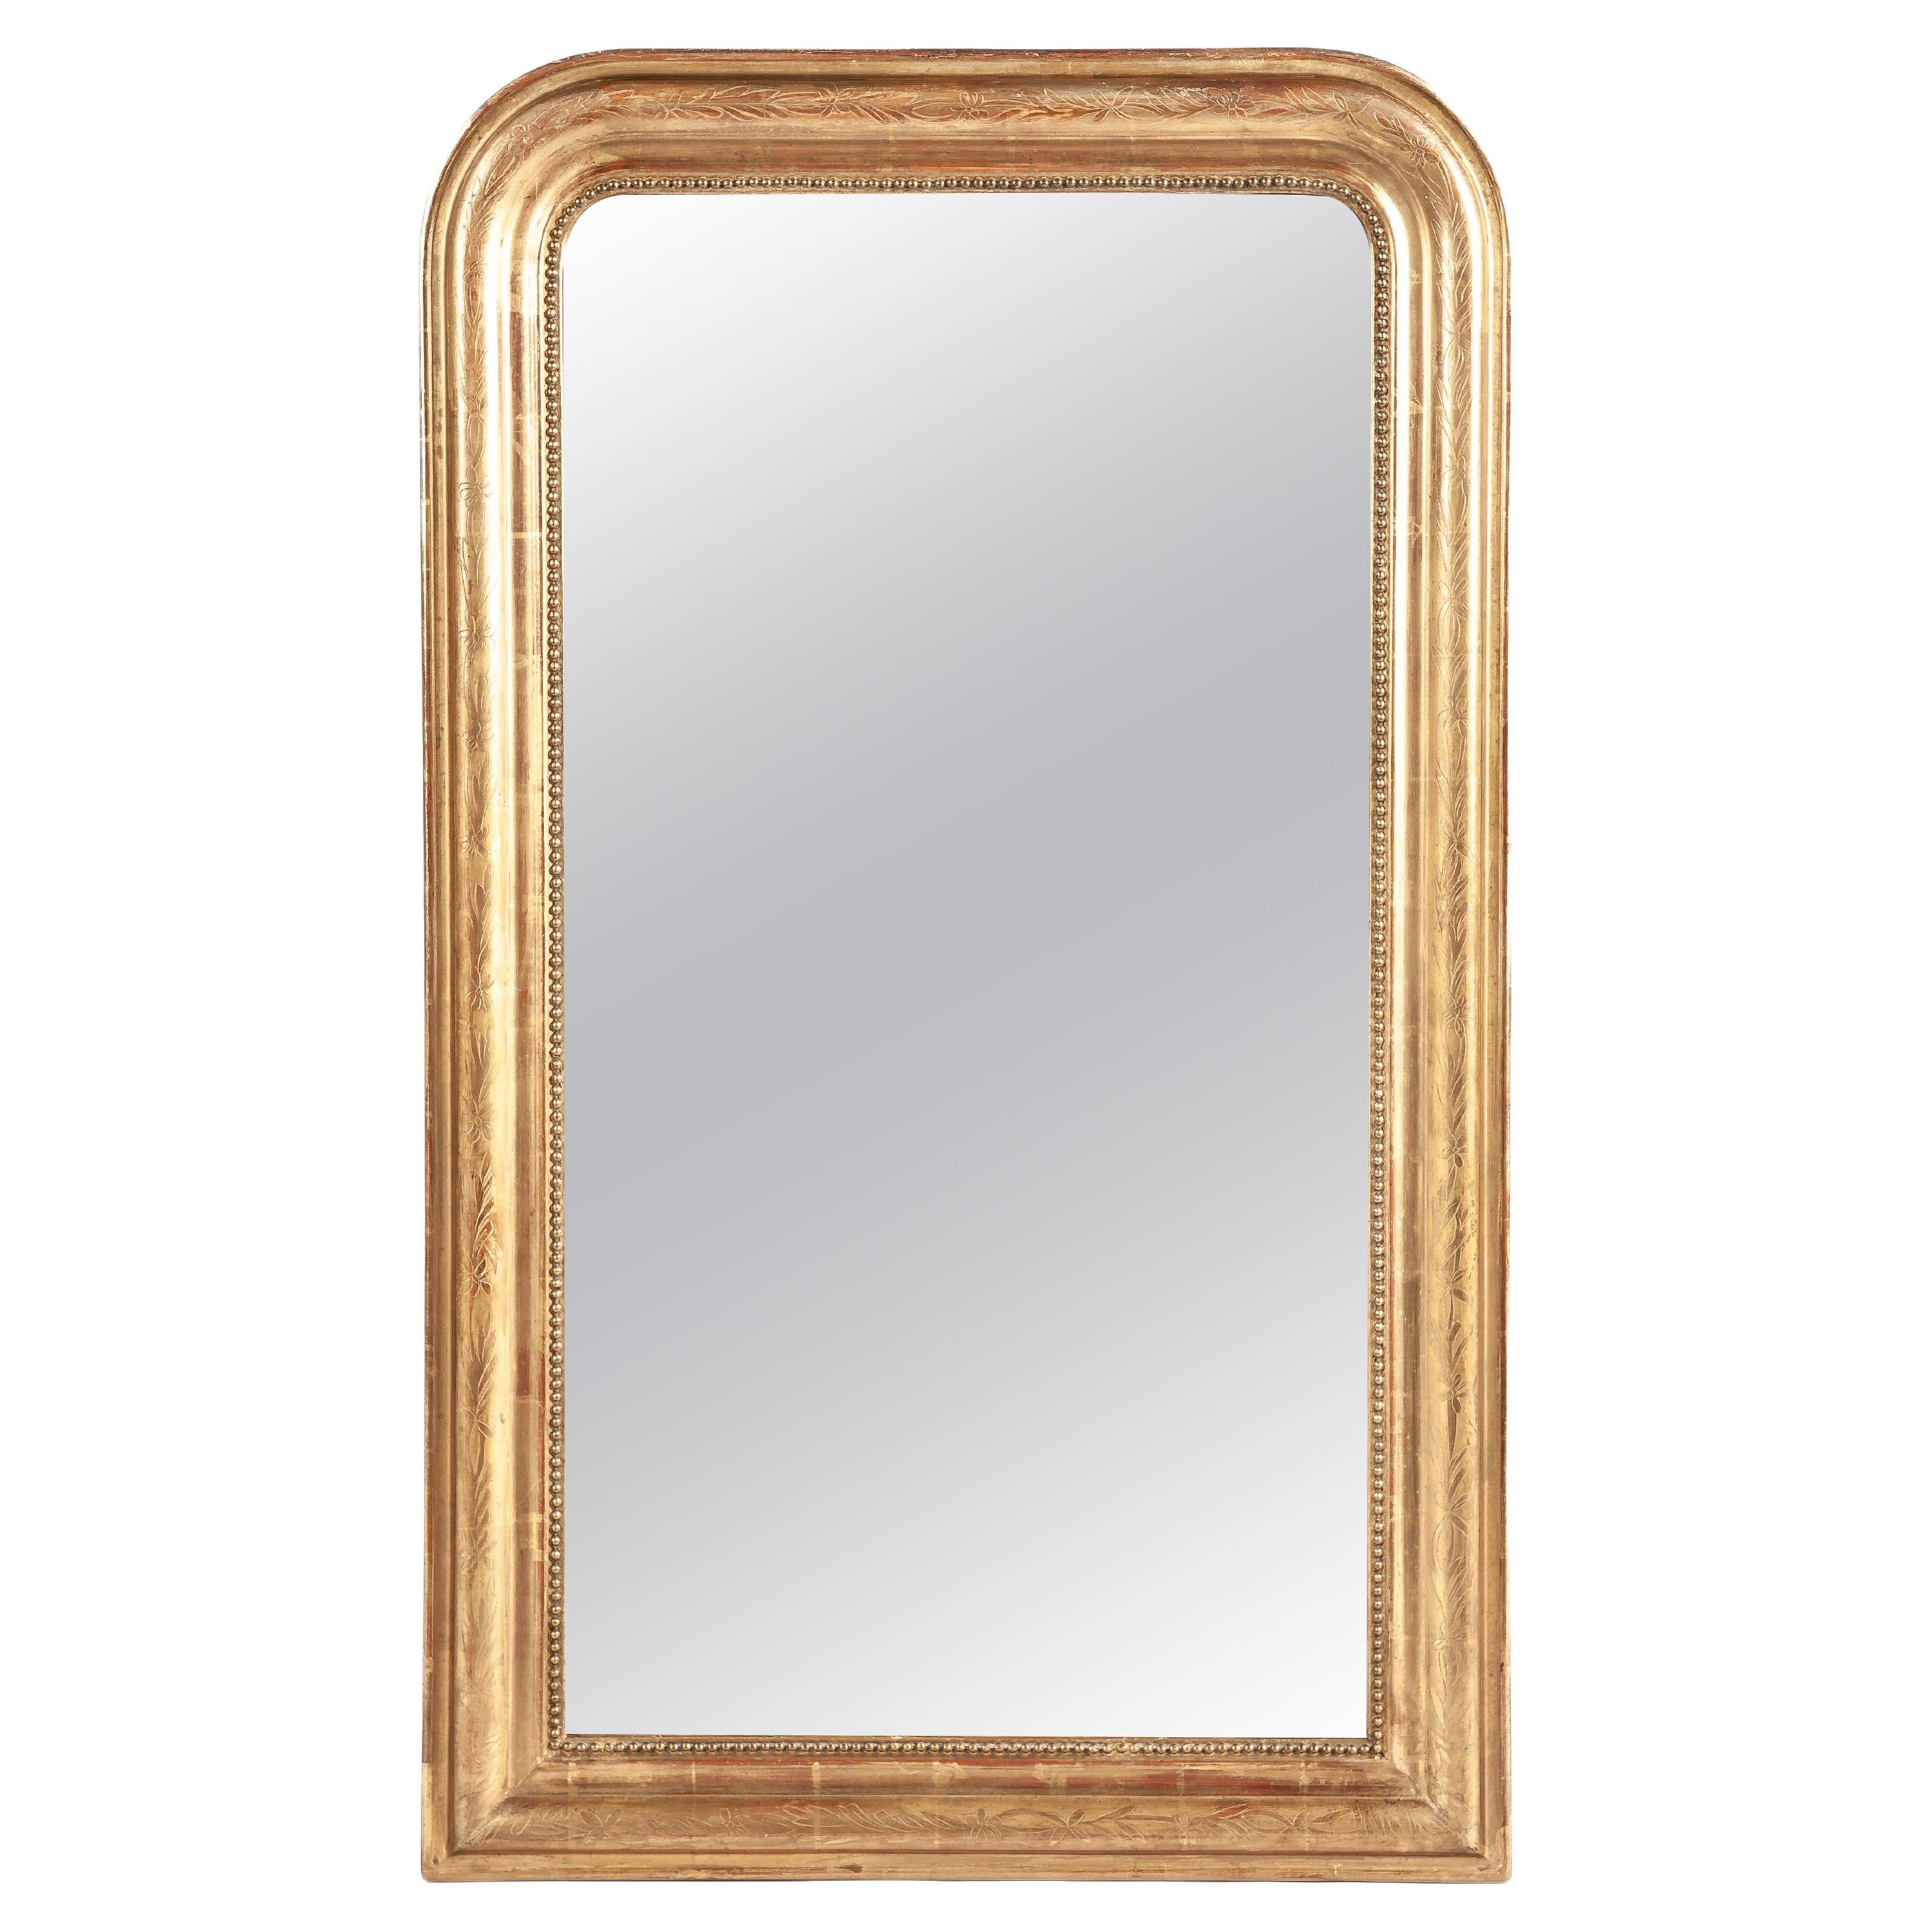 Antique Late 19th-century French gold leaf gilt engraved Louis Philippe mirror For Sale